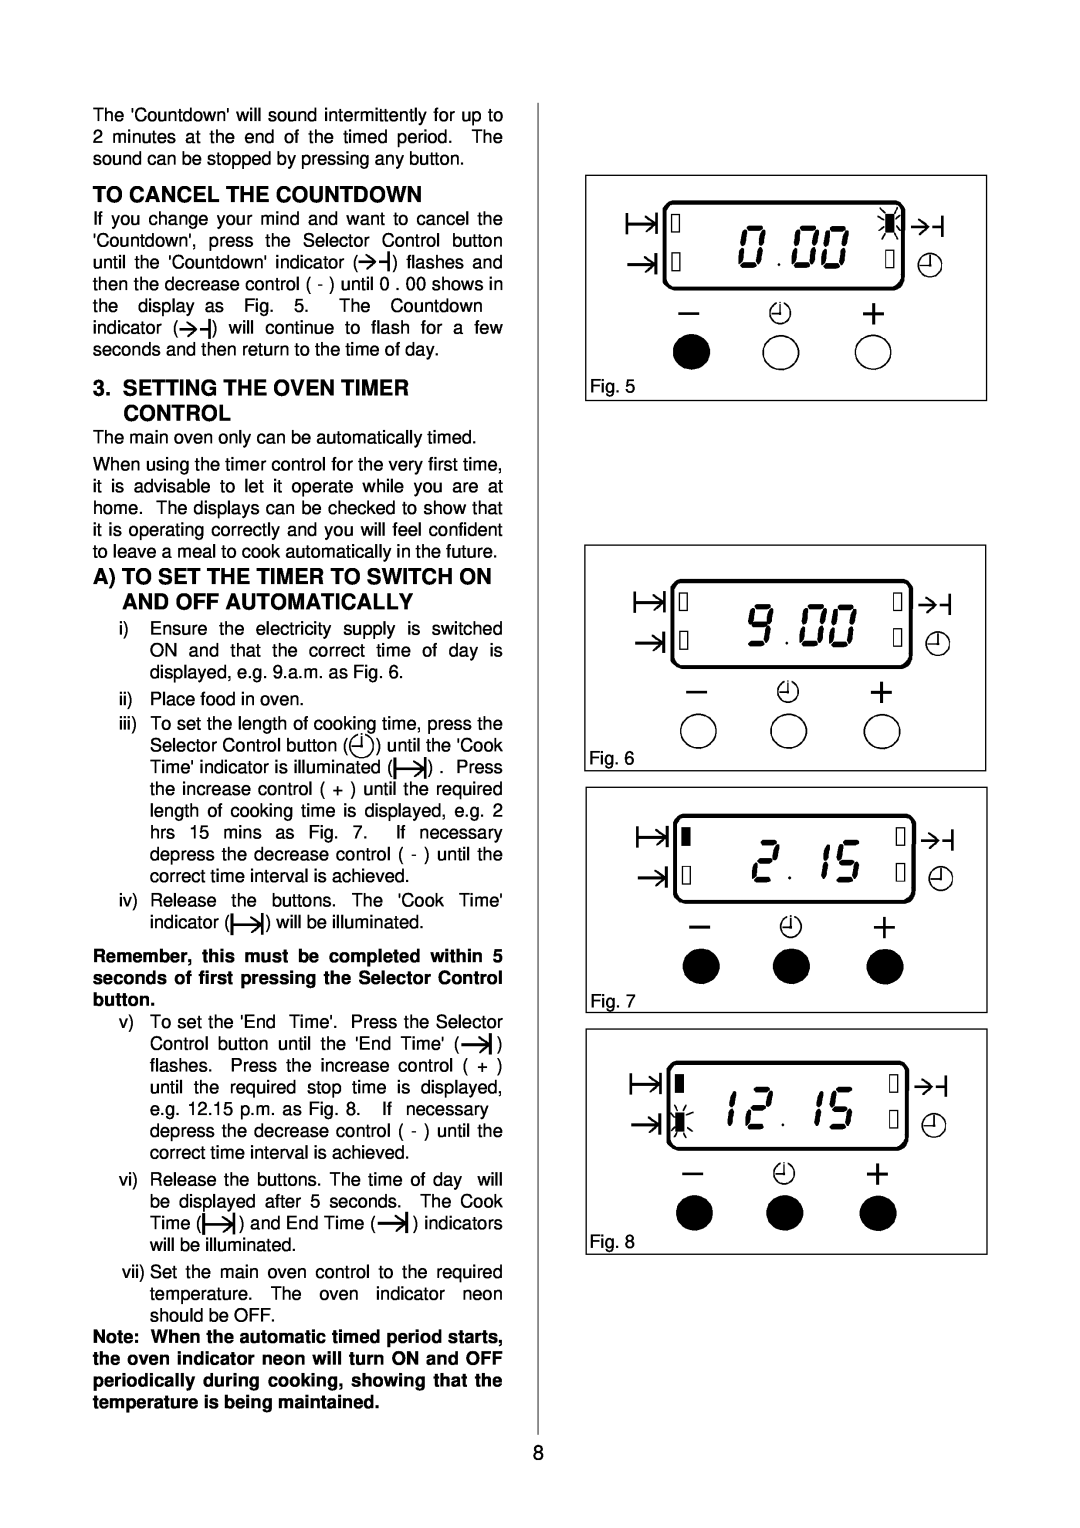 AEG D4100-1 manual To Cancel The Countdown, Setting The Oven Timer Control 